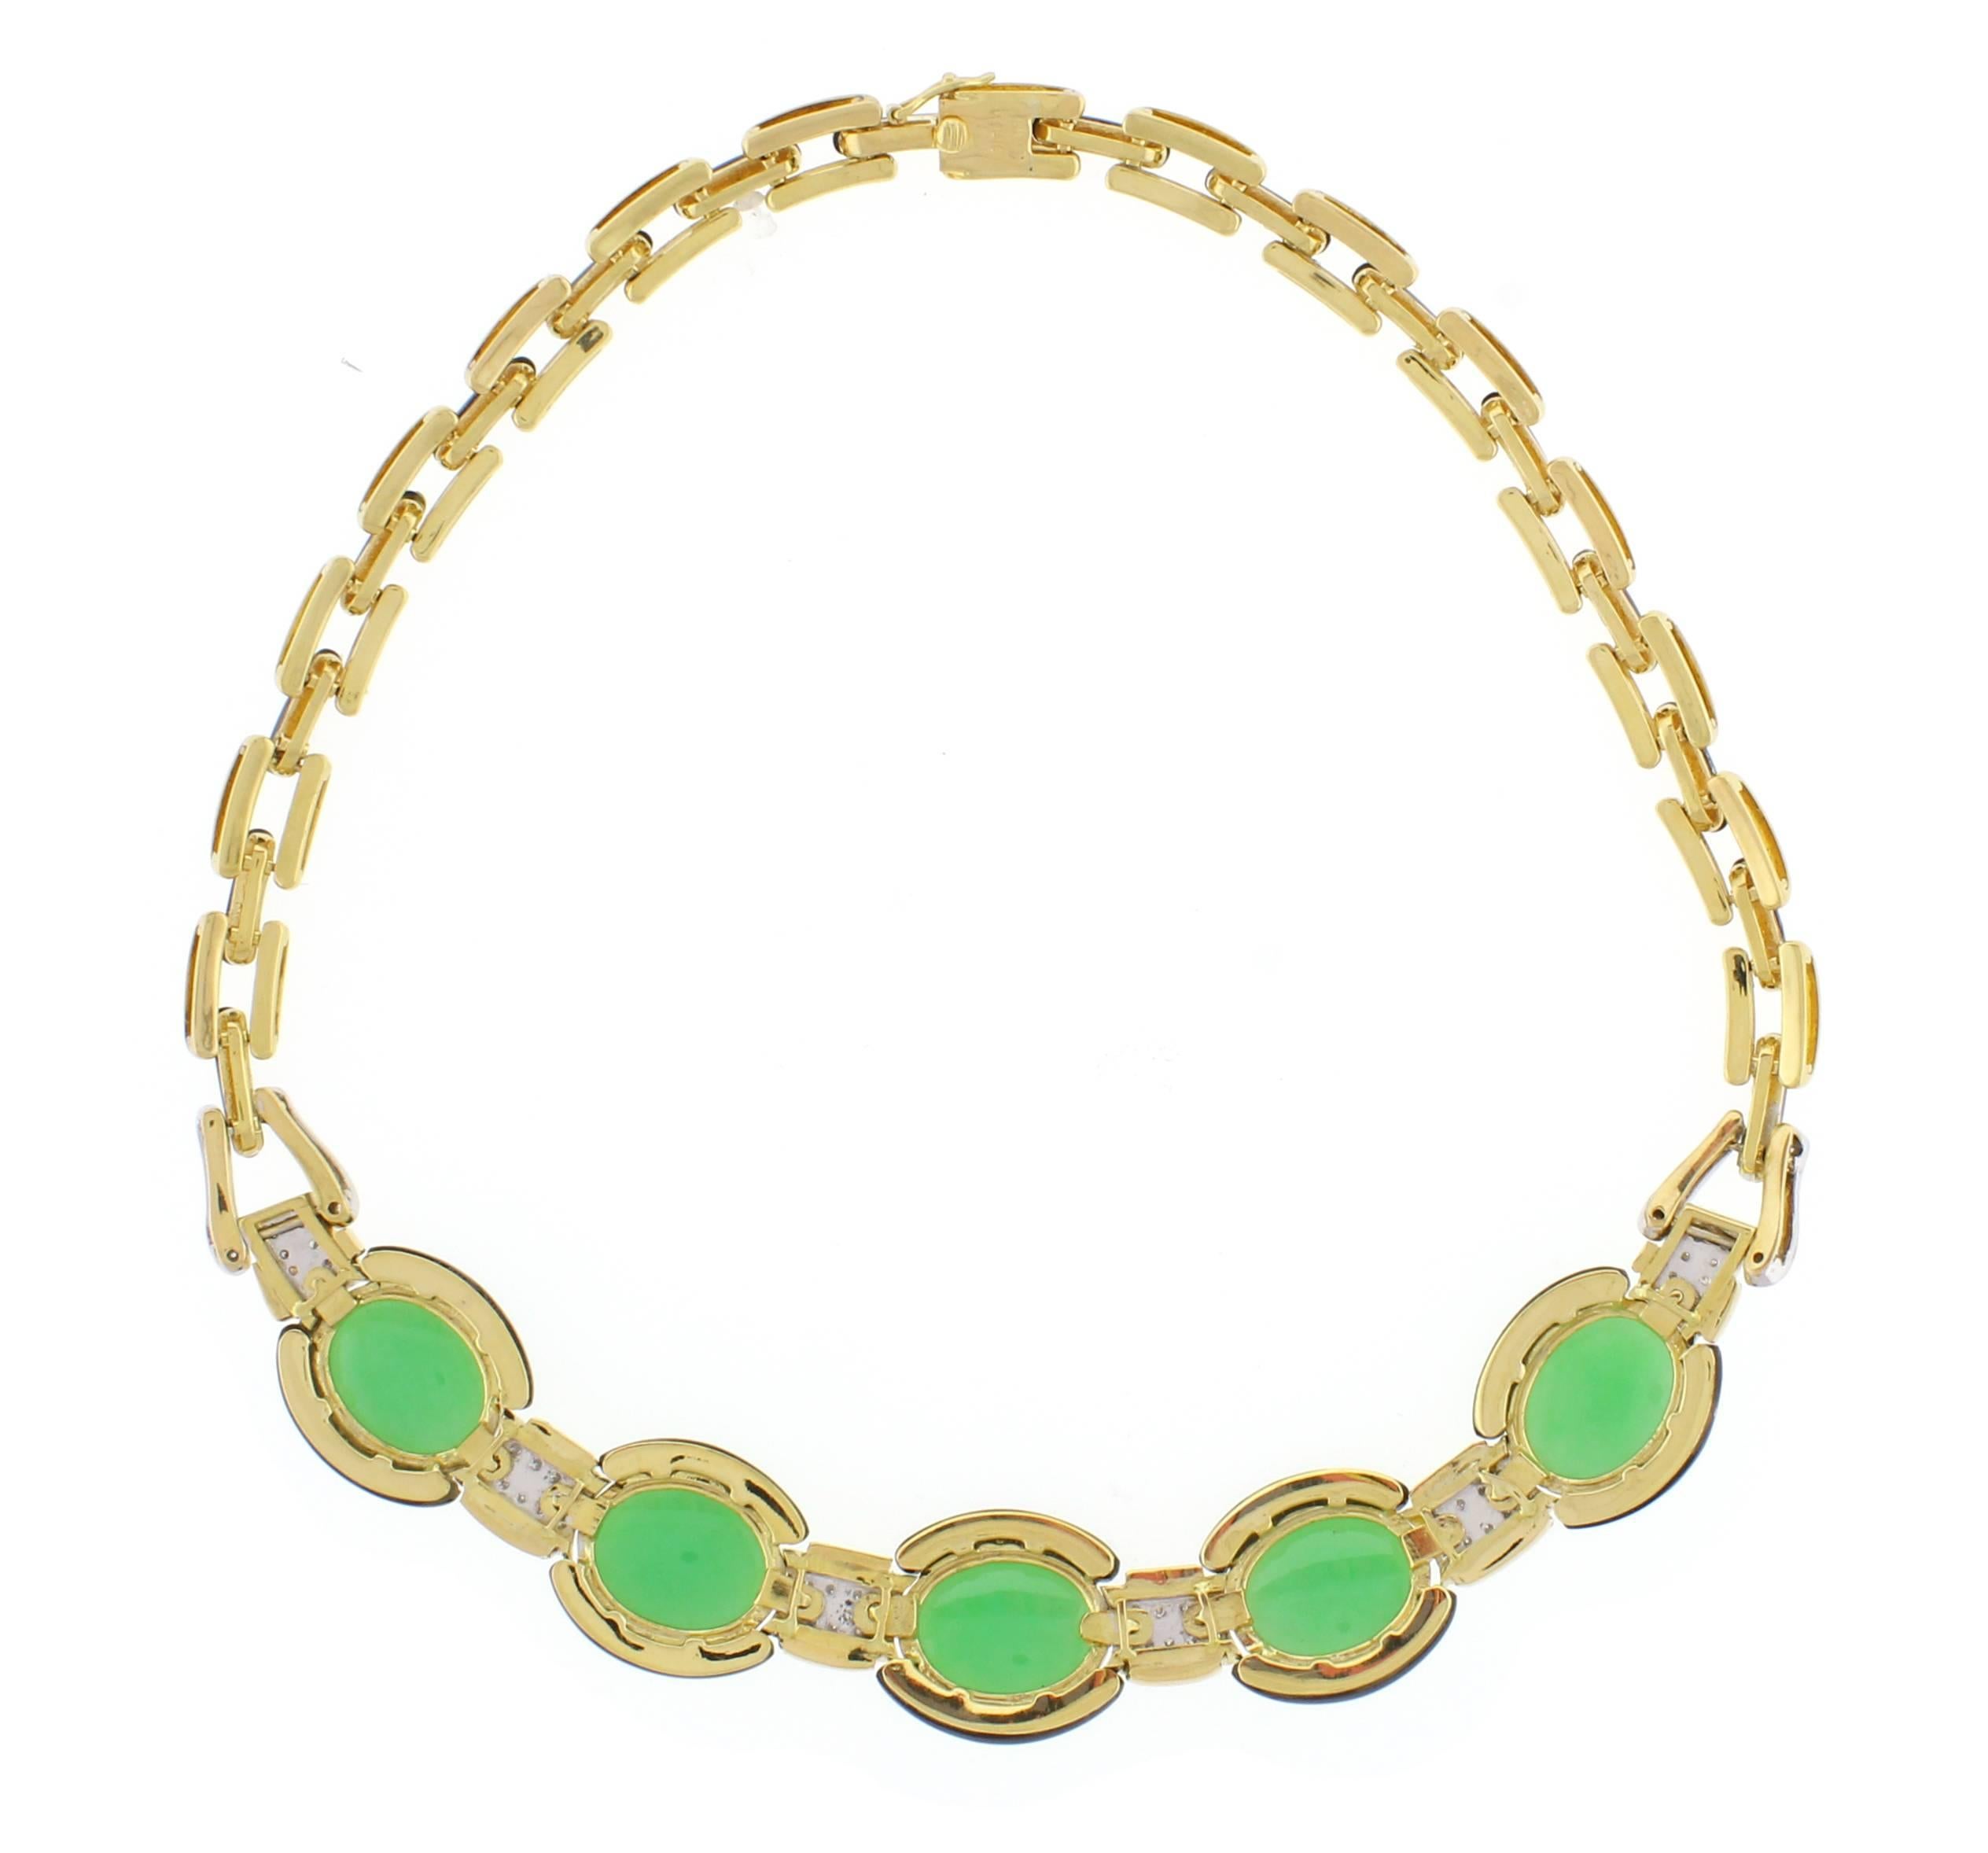 Set in 18 karat yellow gold this stunning necklace features carved black onyx sections, apple green jade cabochons and 88 shimmering brilliant cut diamonds weighing approximately 1.75. The necklace  measure one inch at its widest point and 1/2 of an